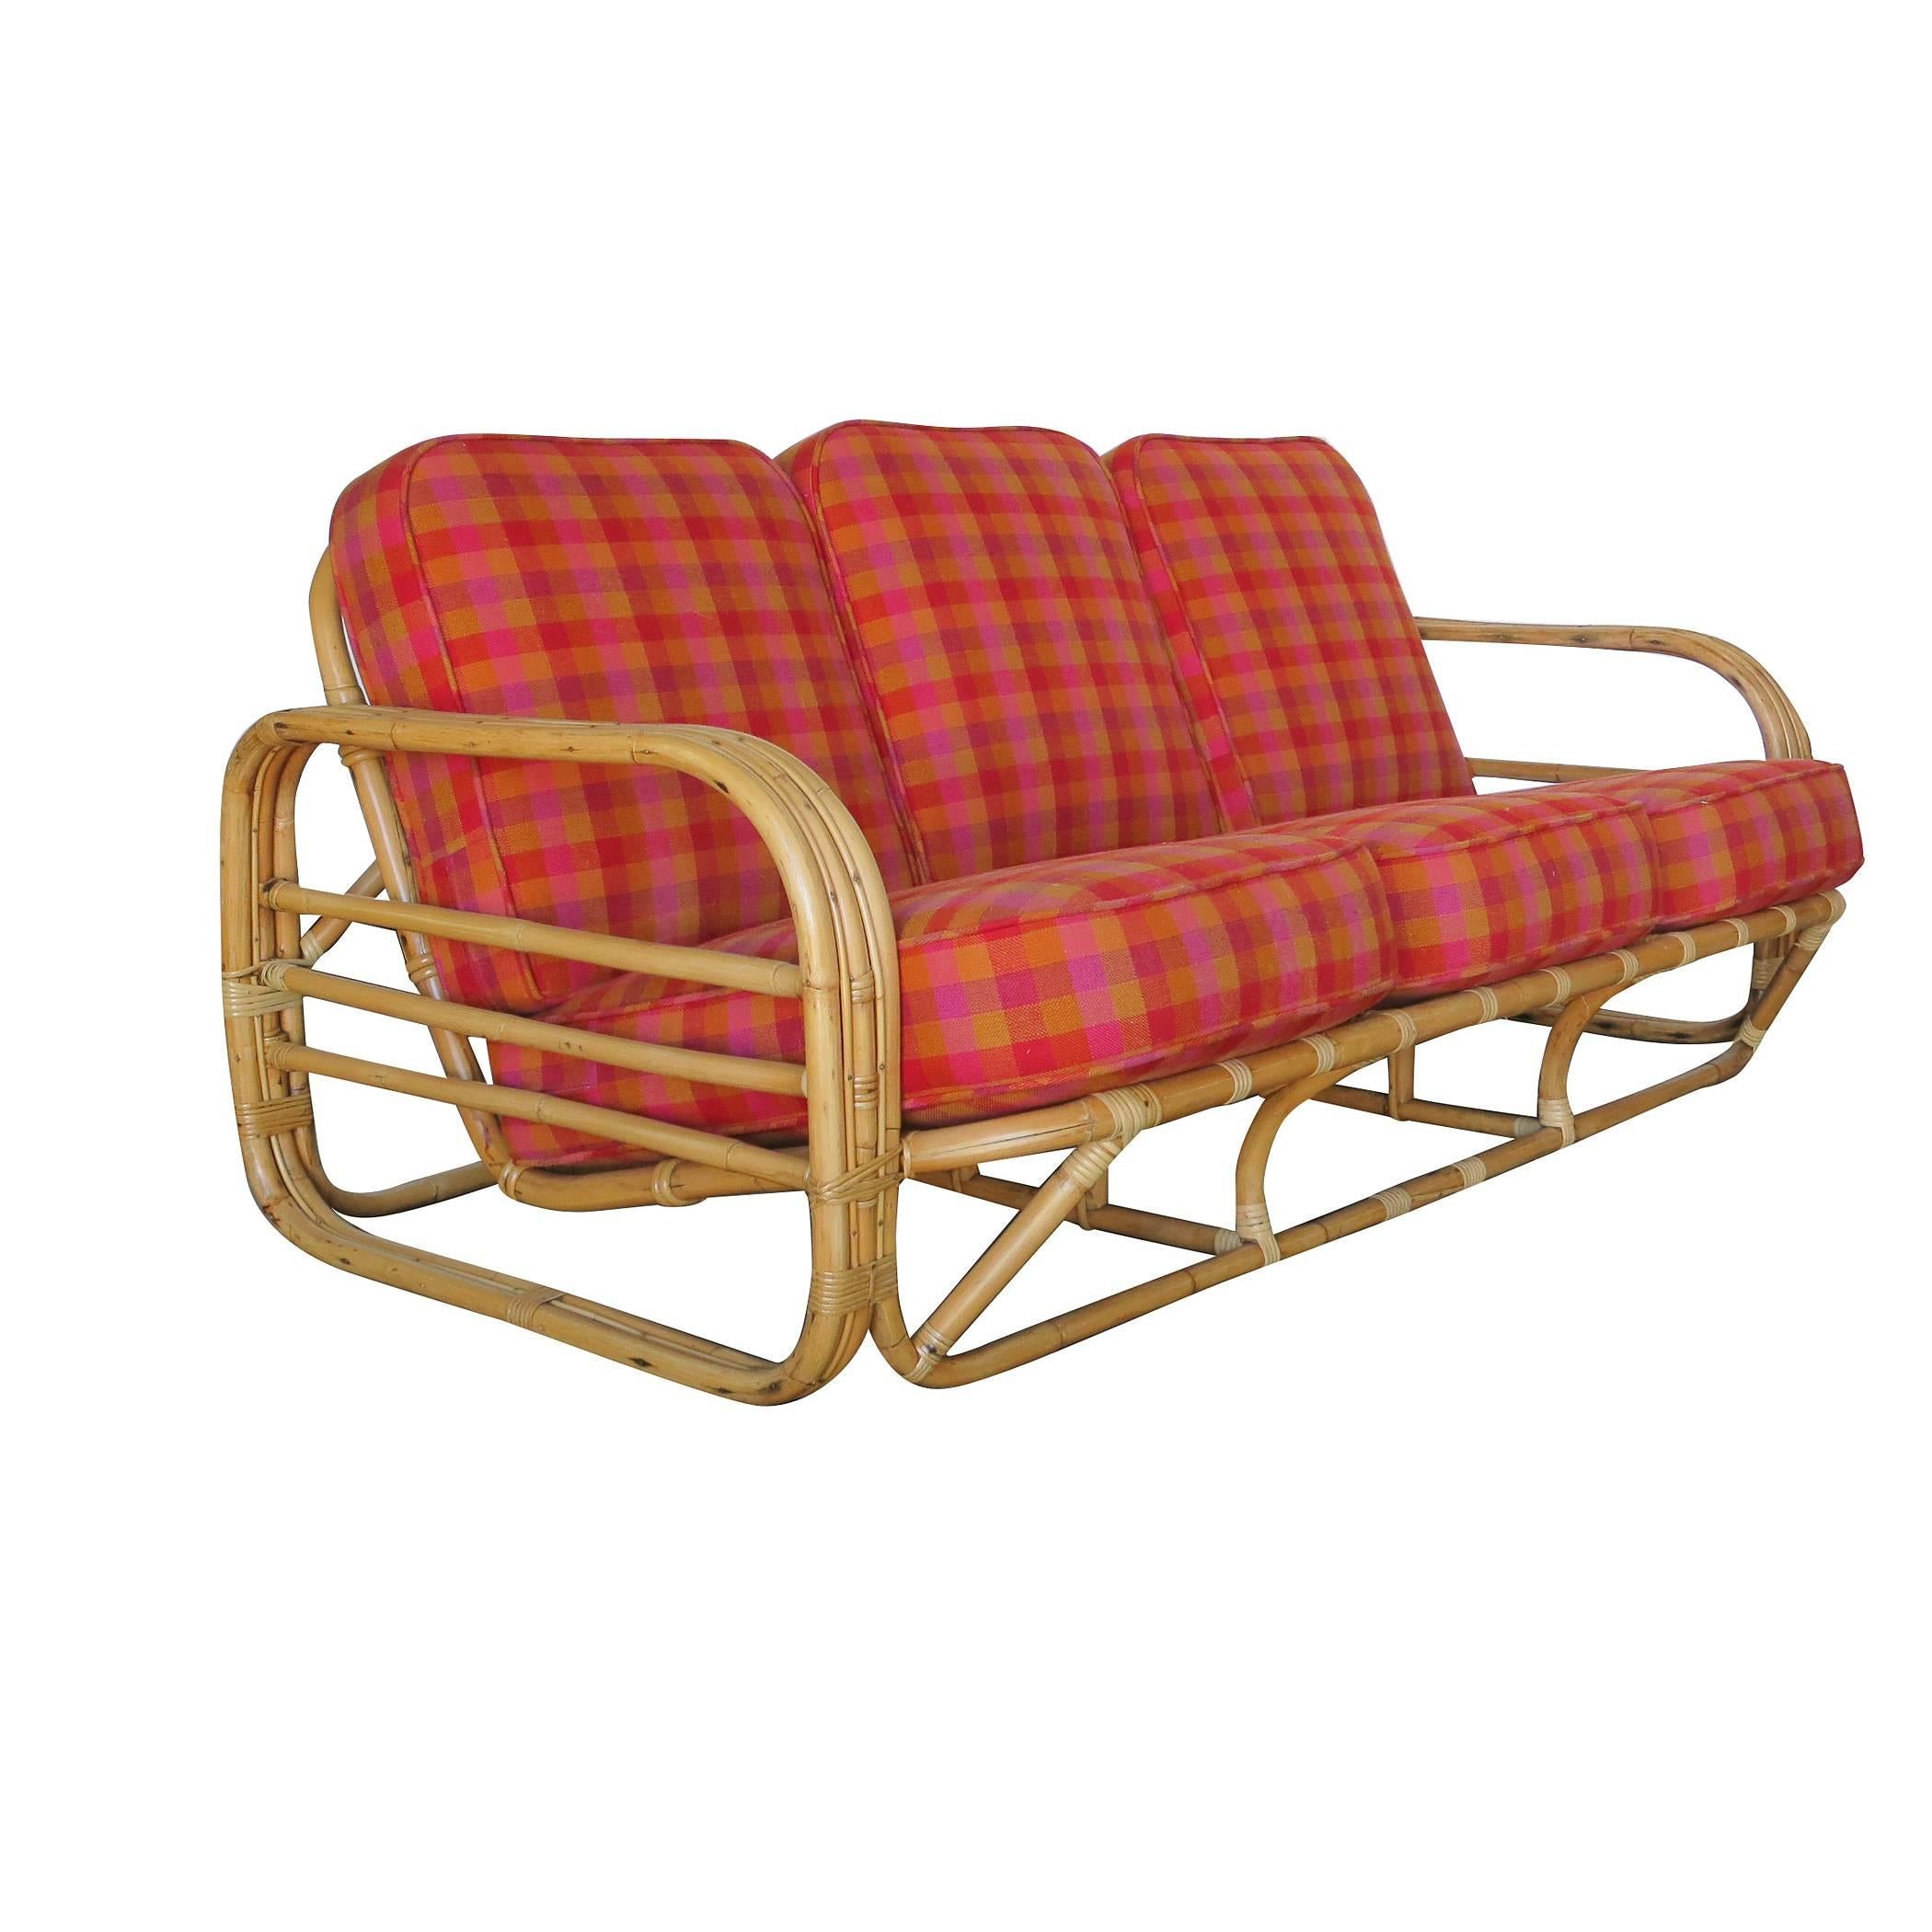 Streamline Art Deco rattan living room set which includes one lounge chair and a matching three-seat sofa.

Each seat features rounded three strand rattan arms with three decorative horizontal bars running through the center of each arm along with